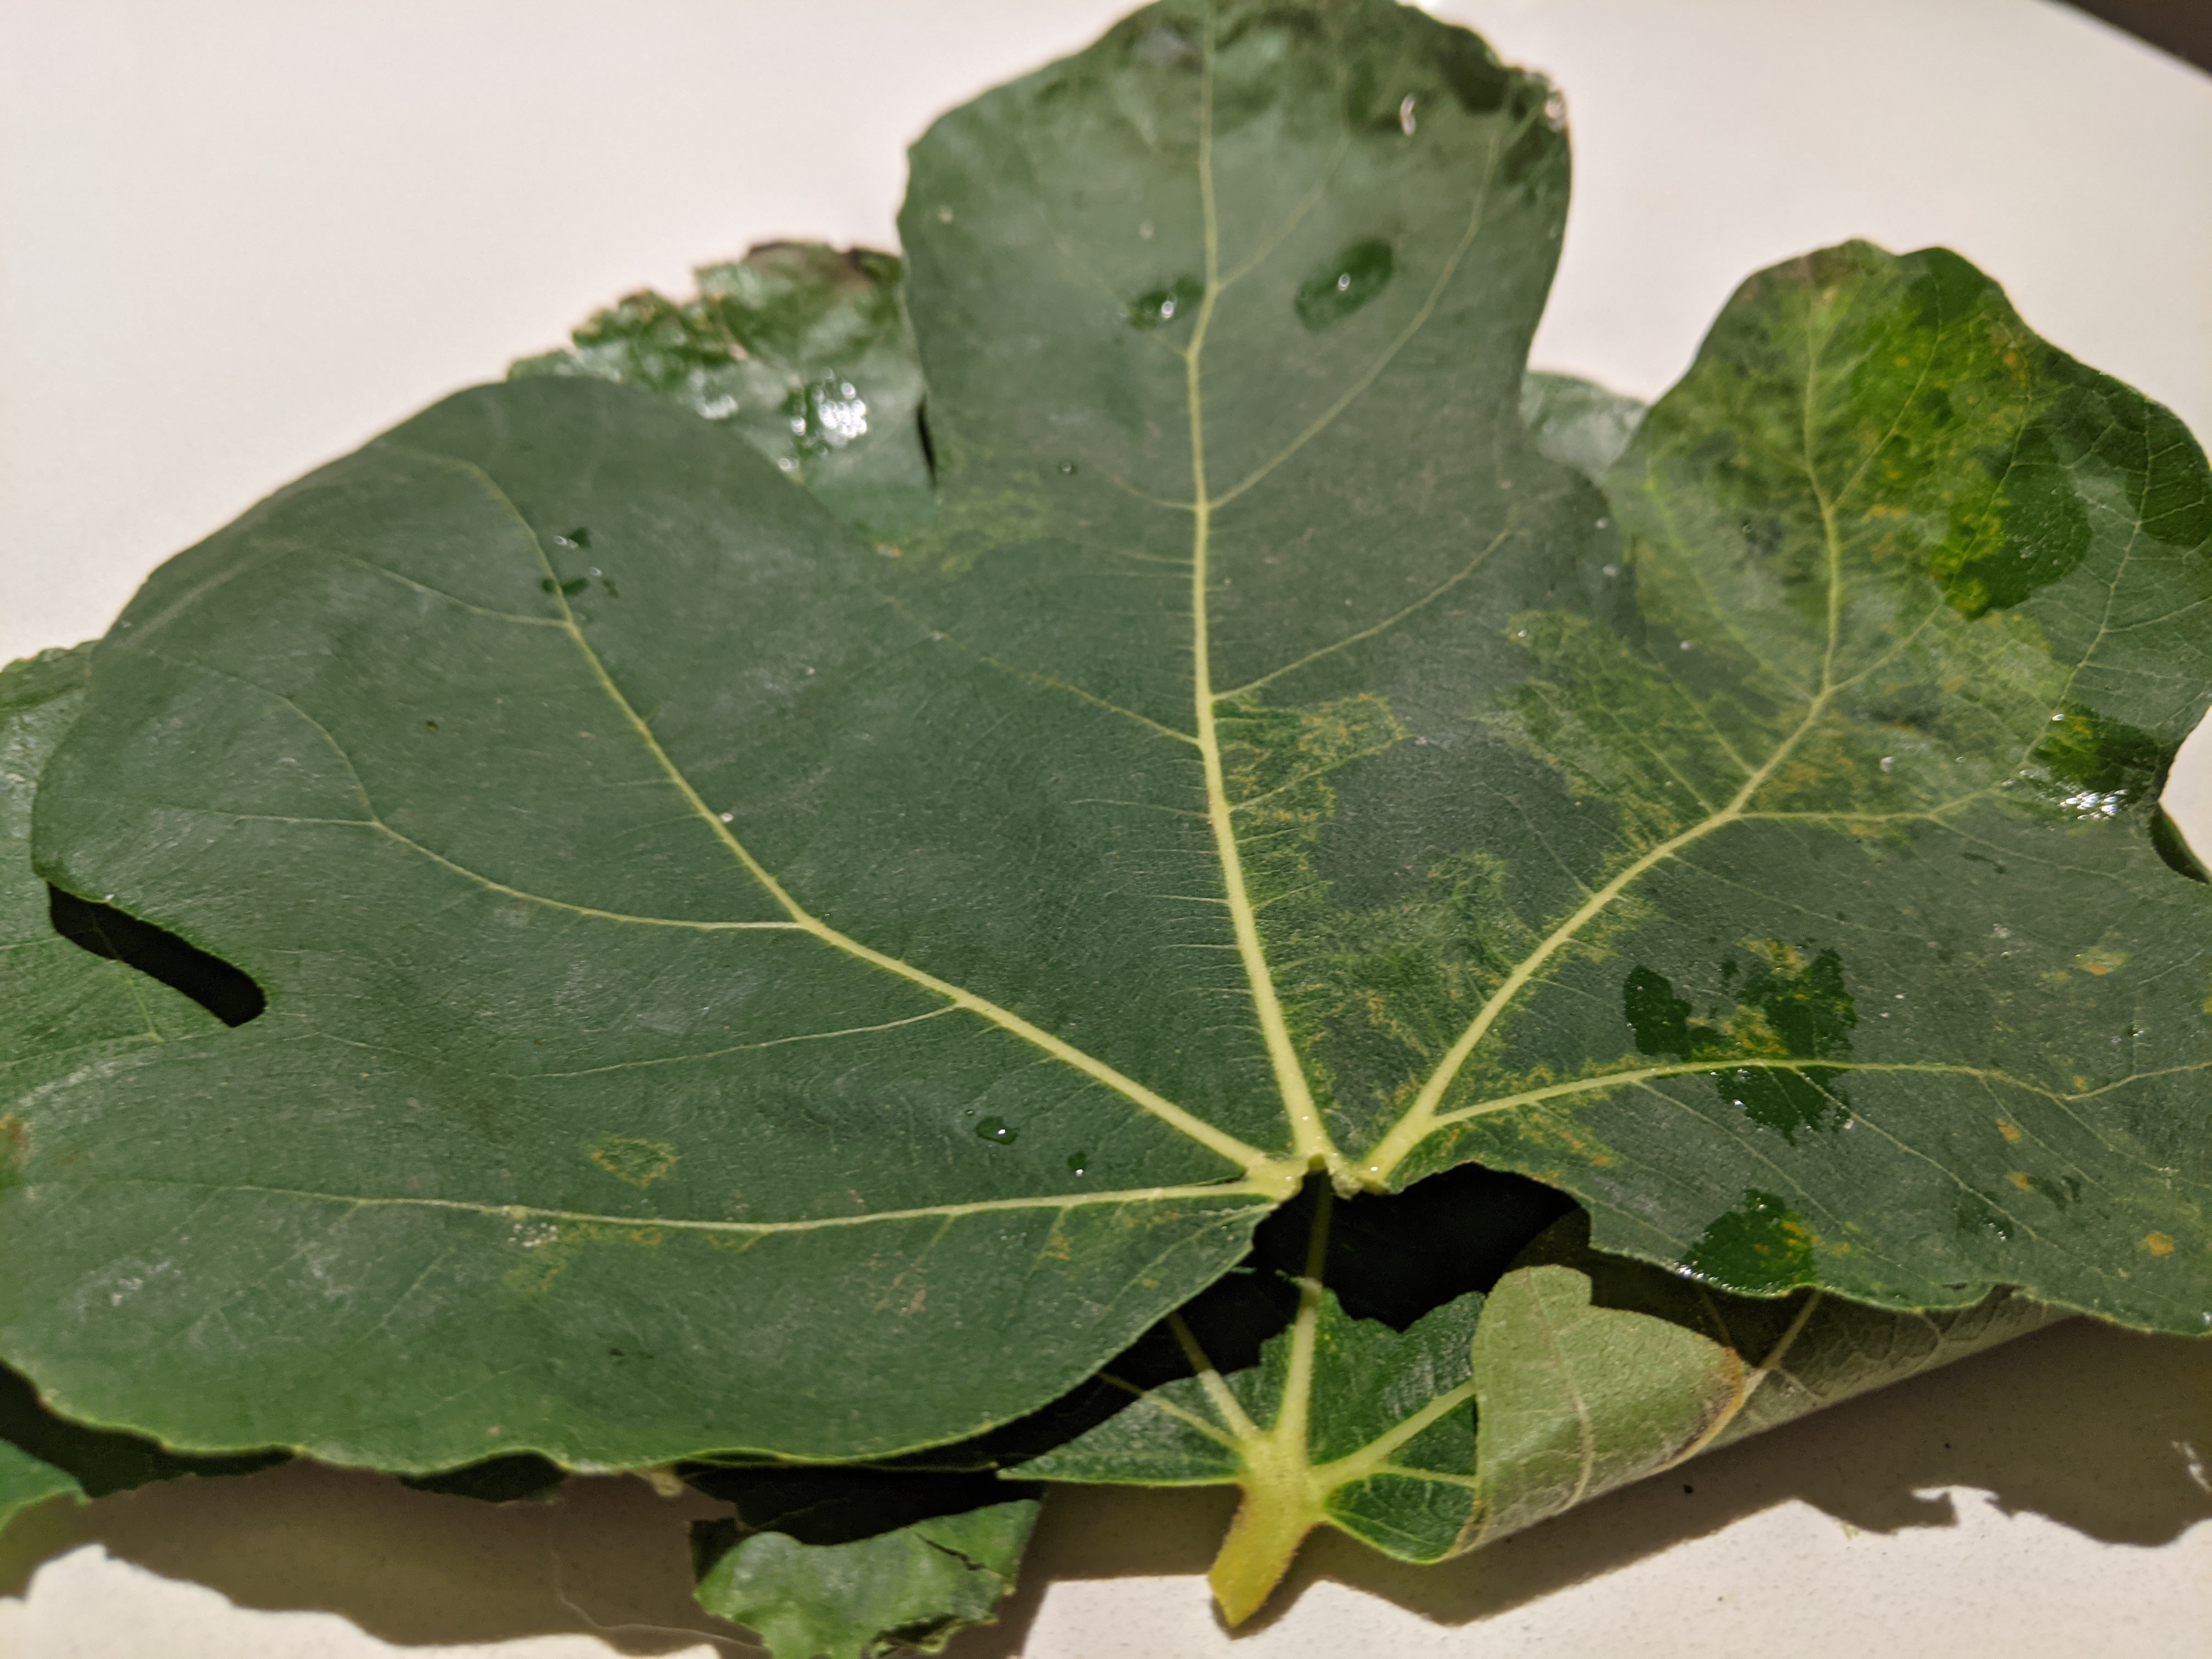 An image of some fig leaves sitting on a white stone kitchen counter